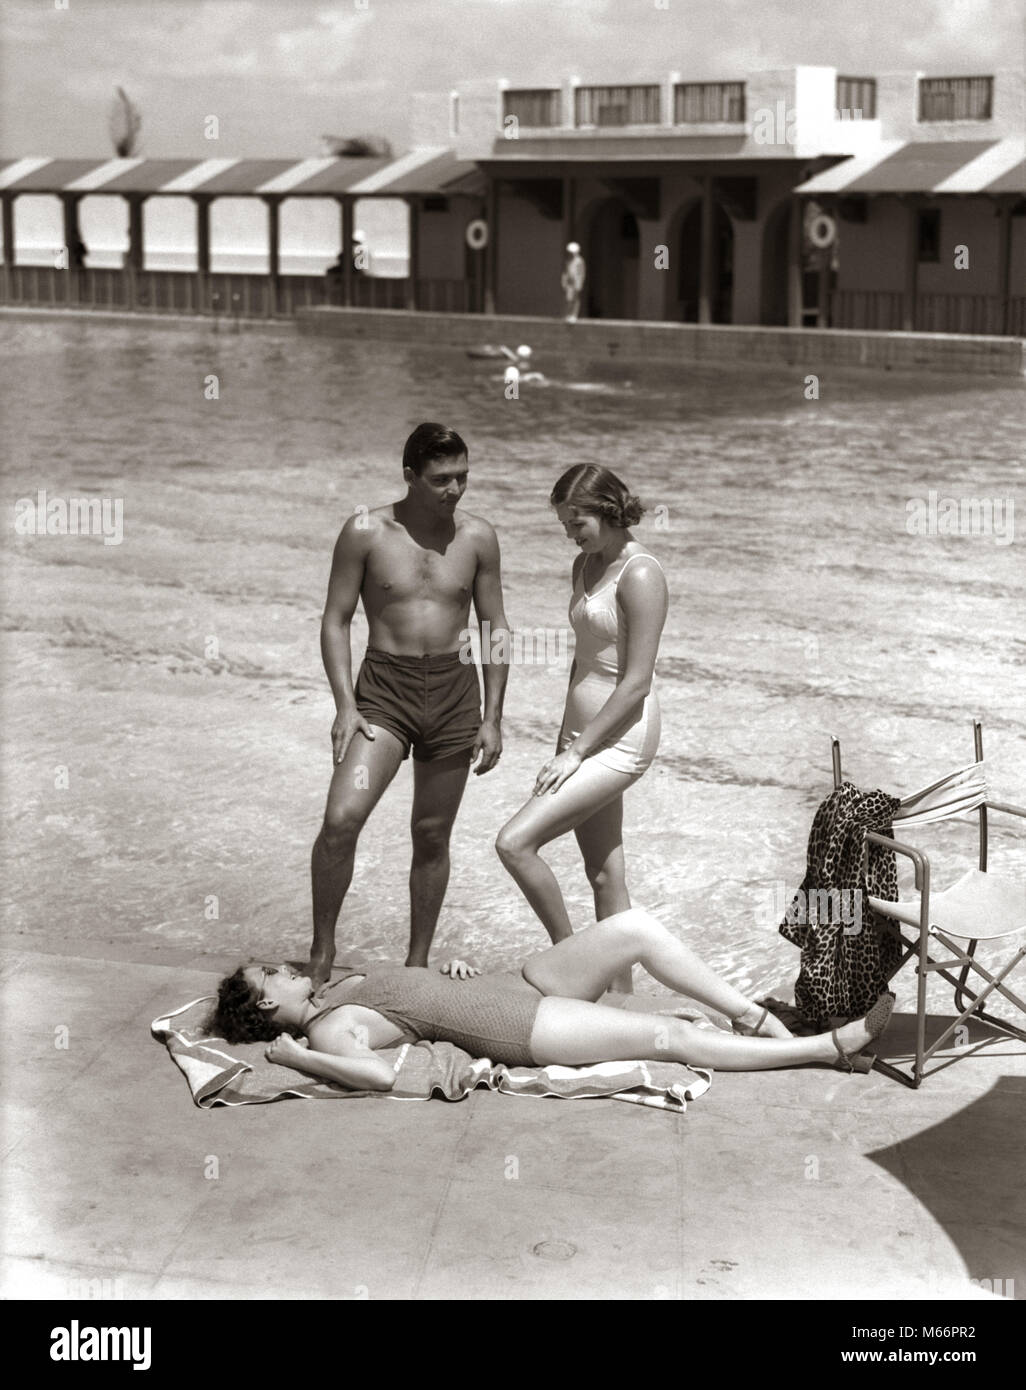 1930s 1940s TWO WOMEN SUNBATHING AND MAN AT HOTEL SWIMMING POOL SIDE WEARING BATHING SUITS VACATION MIAMI BEACH FLORIDA USA - s9286 HAR001 HARS SWIMMER TROPICAL BATHING YOUNG ADULT LEOPARD SUITS VACATION CAUCASIAN WEAR LIFESTYLE ROBE SWIM GROWNUP HEALTHINESS UNITED STATES COPY SPACE FRIENDSHIP FULL-LENGTH GROWN-UP SUNBATHING NOSTALGIA NORTH AMERICA TOGETHERNESS NORTH AMERICAN URBAN CENTER SWIMMING POOL LEISURE RELAXATION RECREATION WATER FELINE RECREATION SOUTHEAST SOUTHERN EAST COAST SANDY POOL SIDE SMALL GROUP OF PEOPLE GULF COAST CREATURE FL LARGE CAT MAMMAL POOL-SIDE YOUNG ADULT MAN Stock Photo